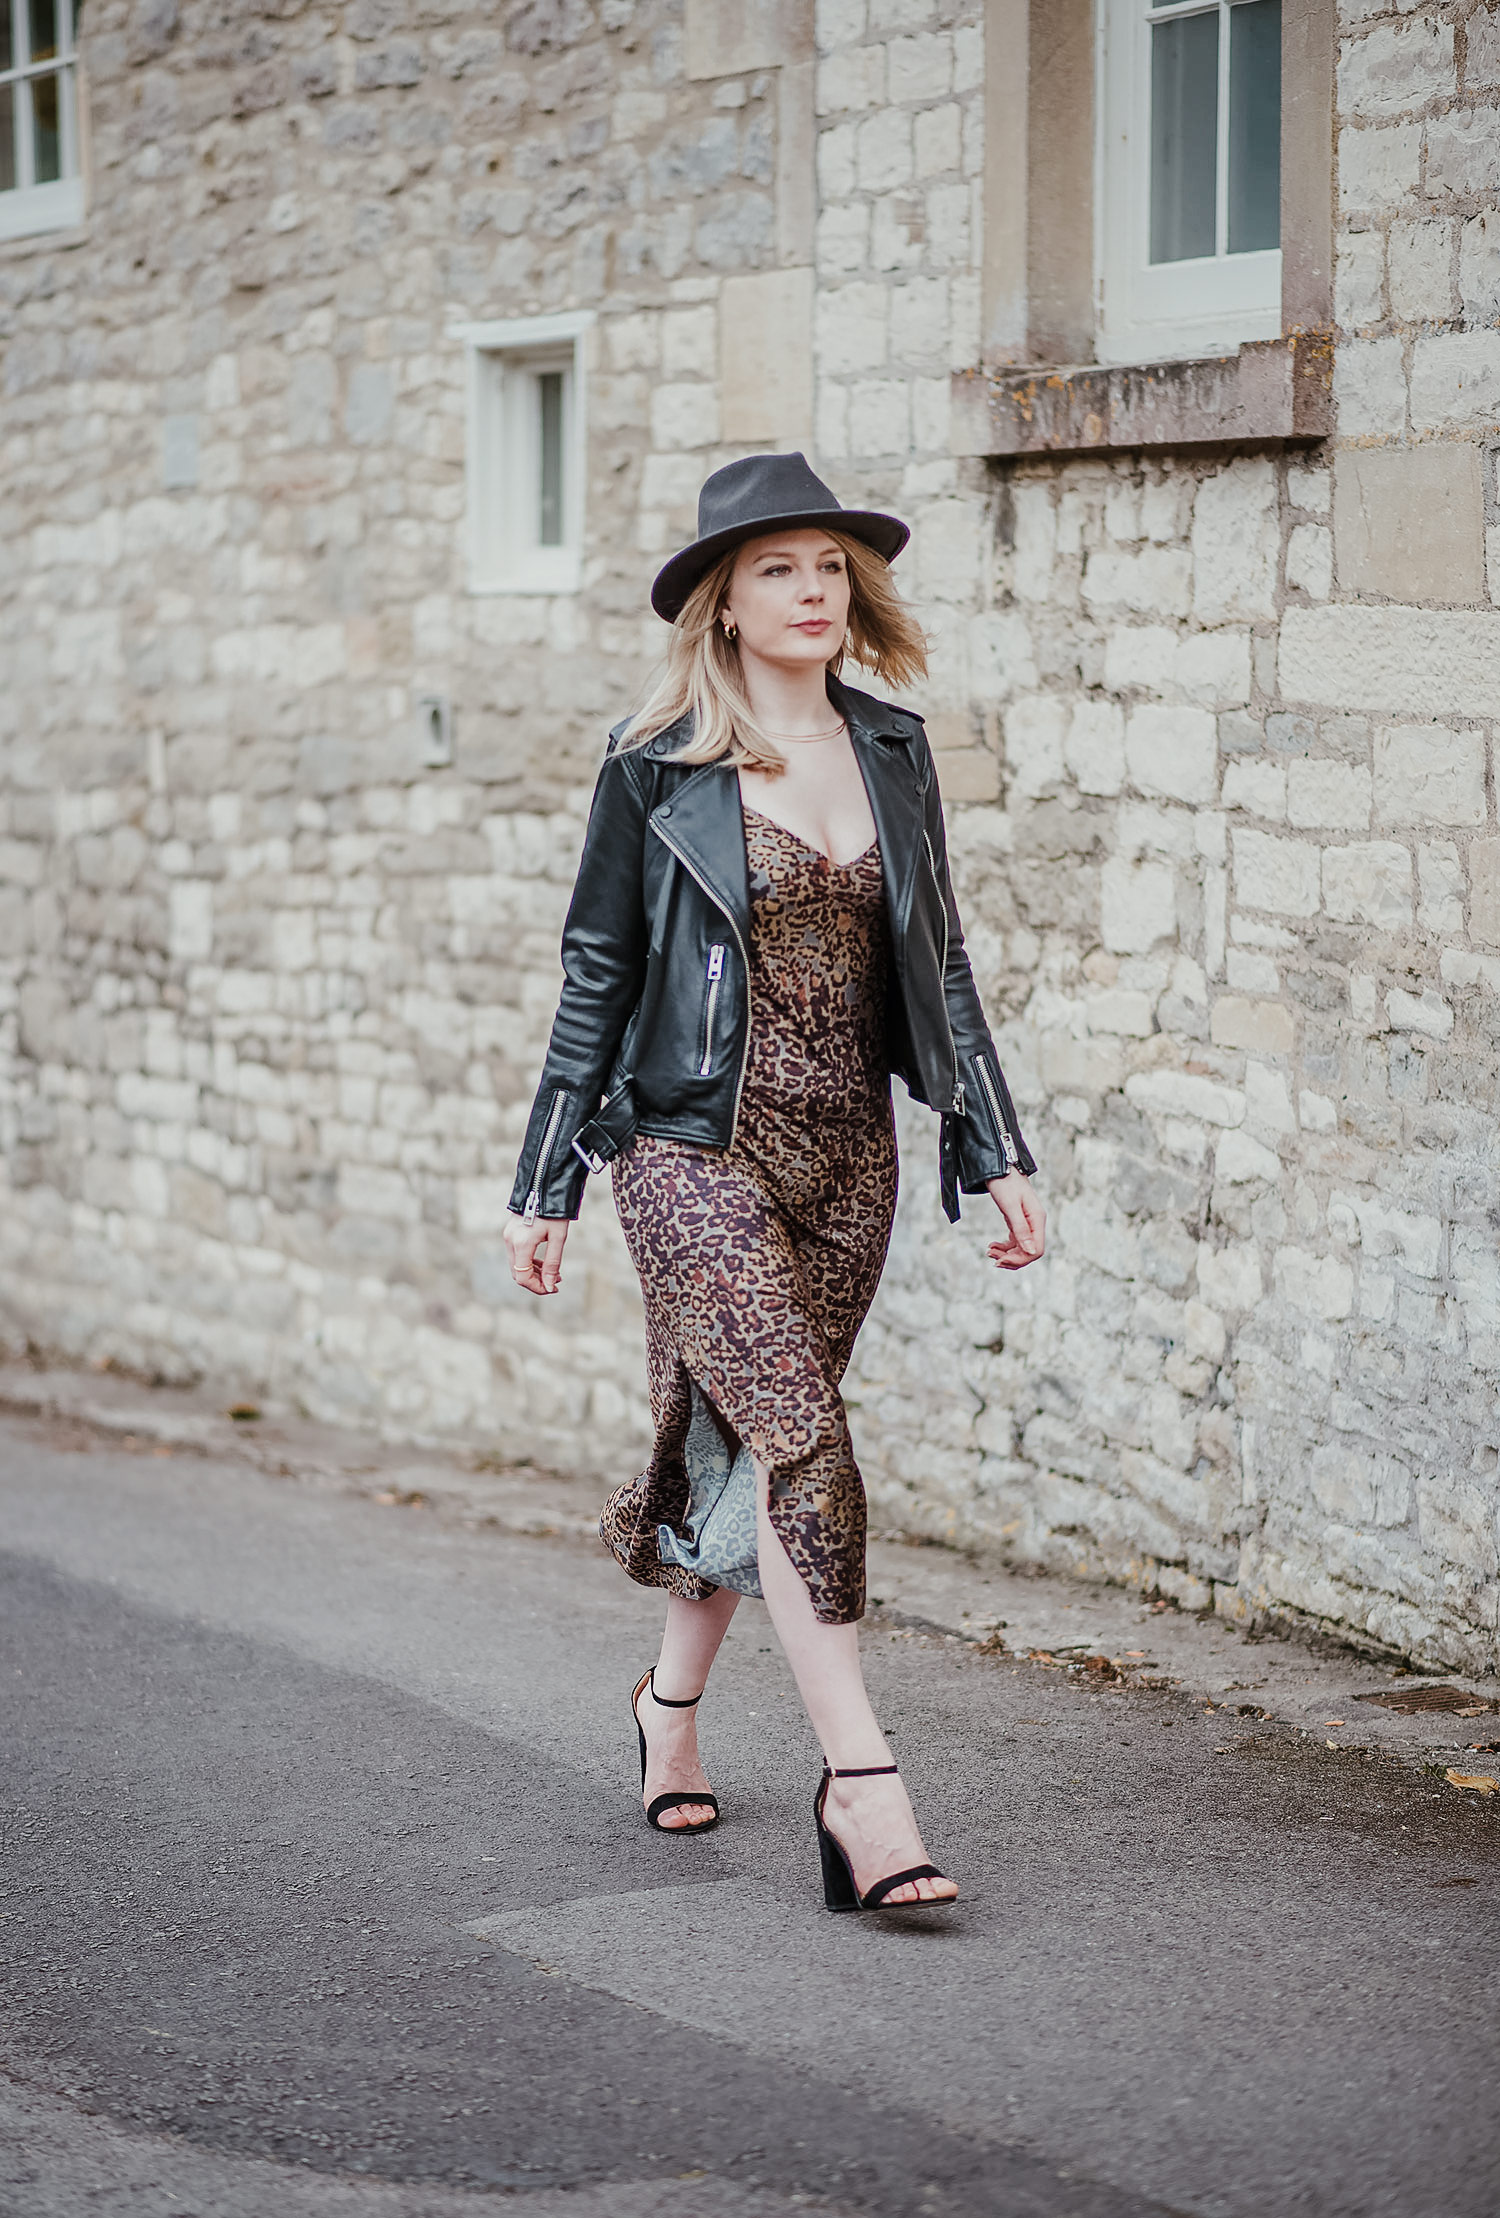 The Leopard And The Leather – FORD LA FEMME